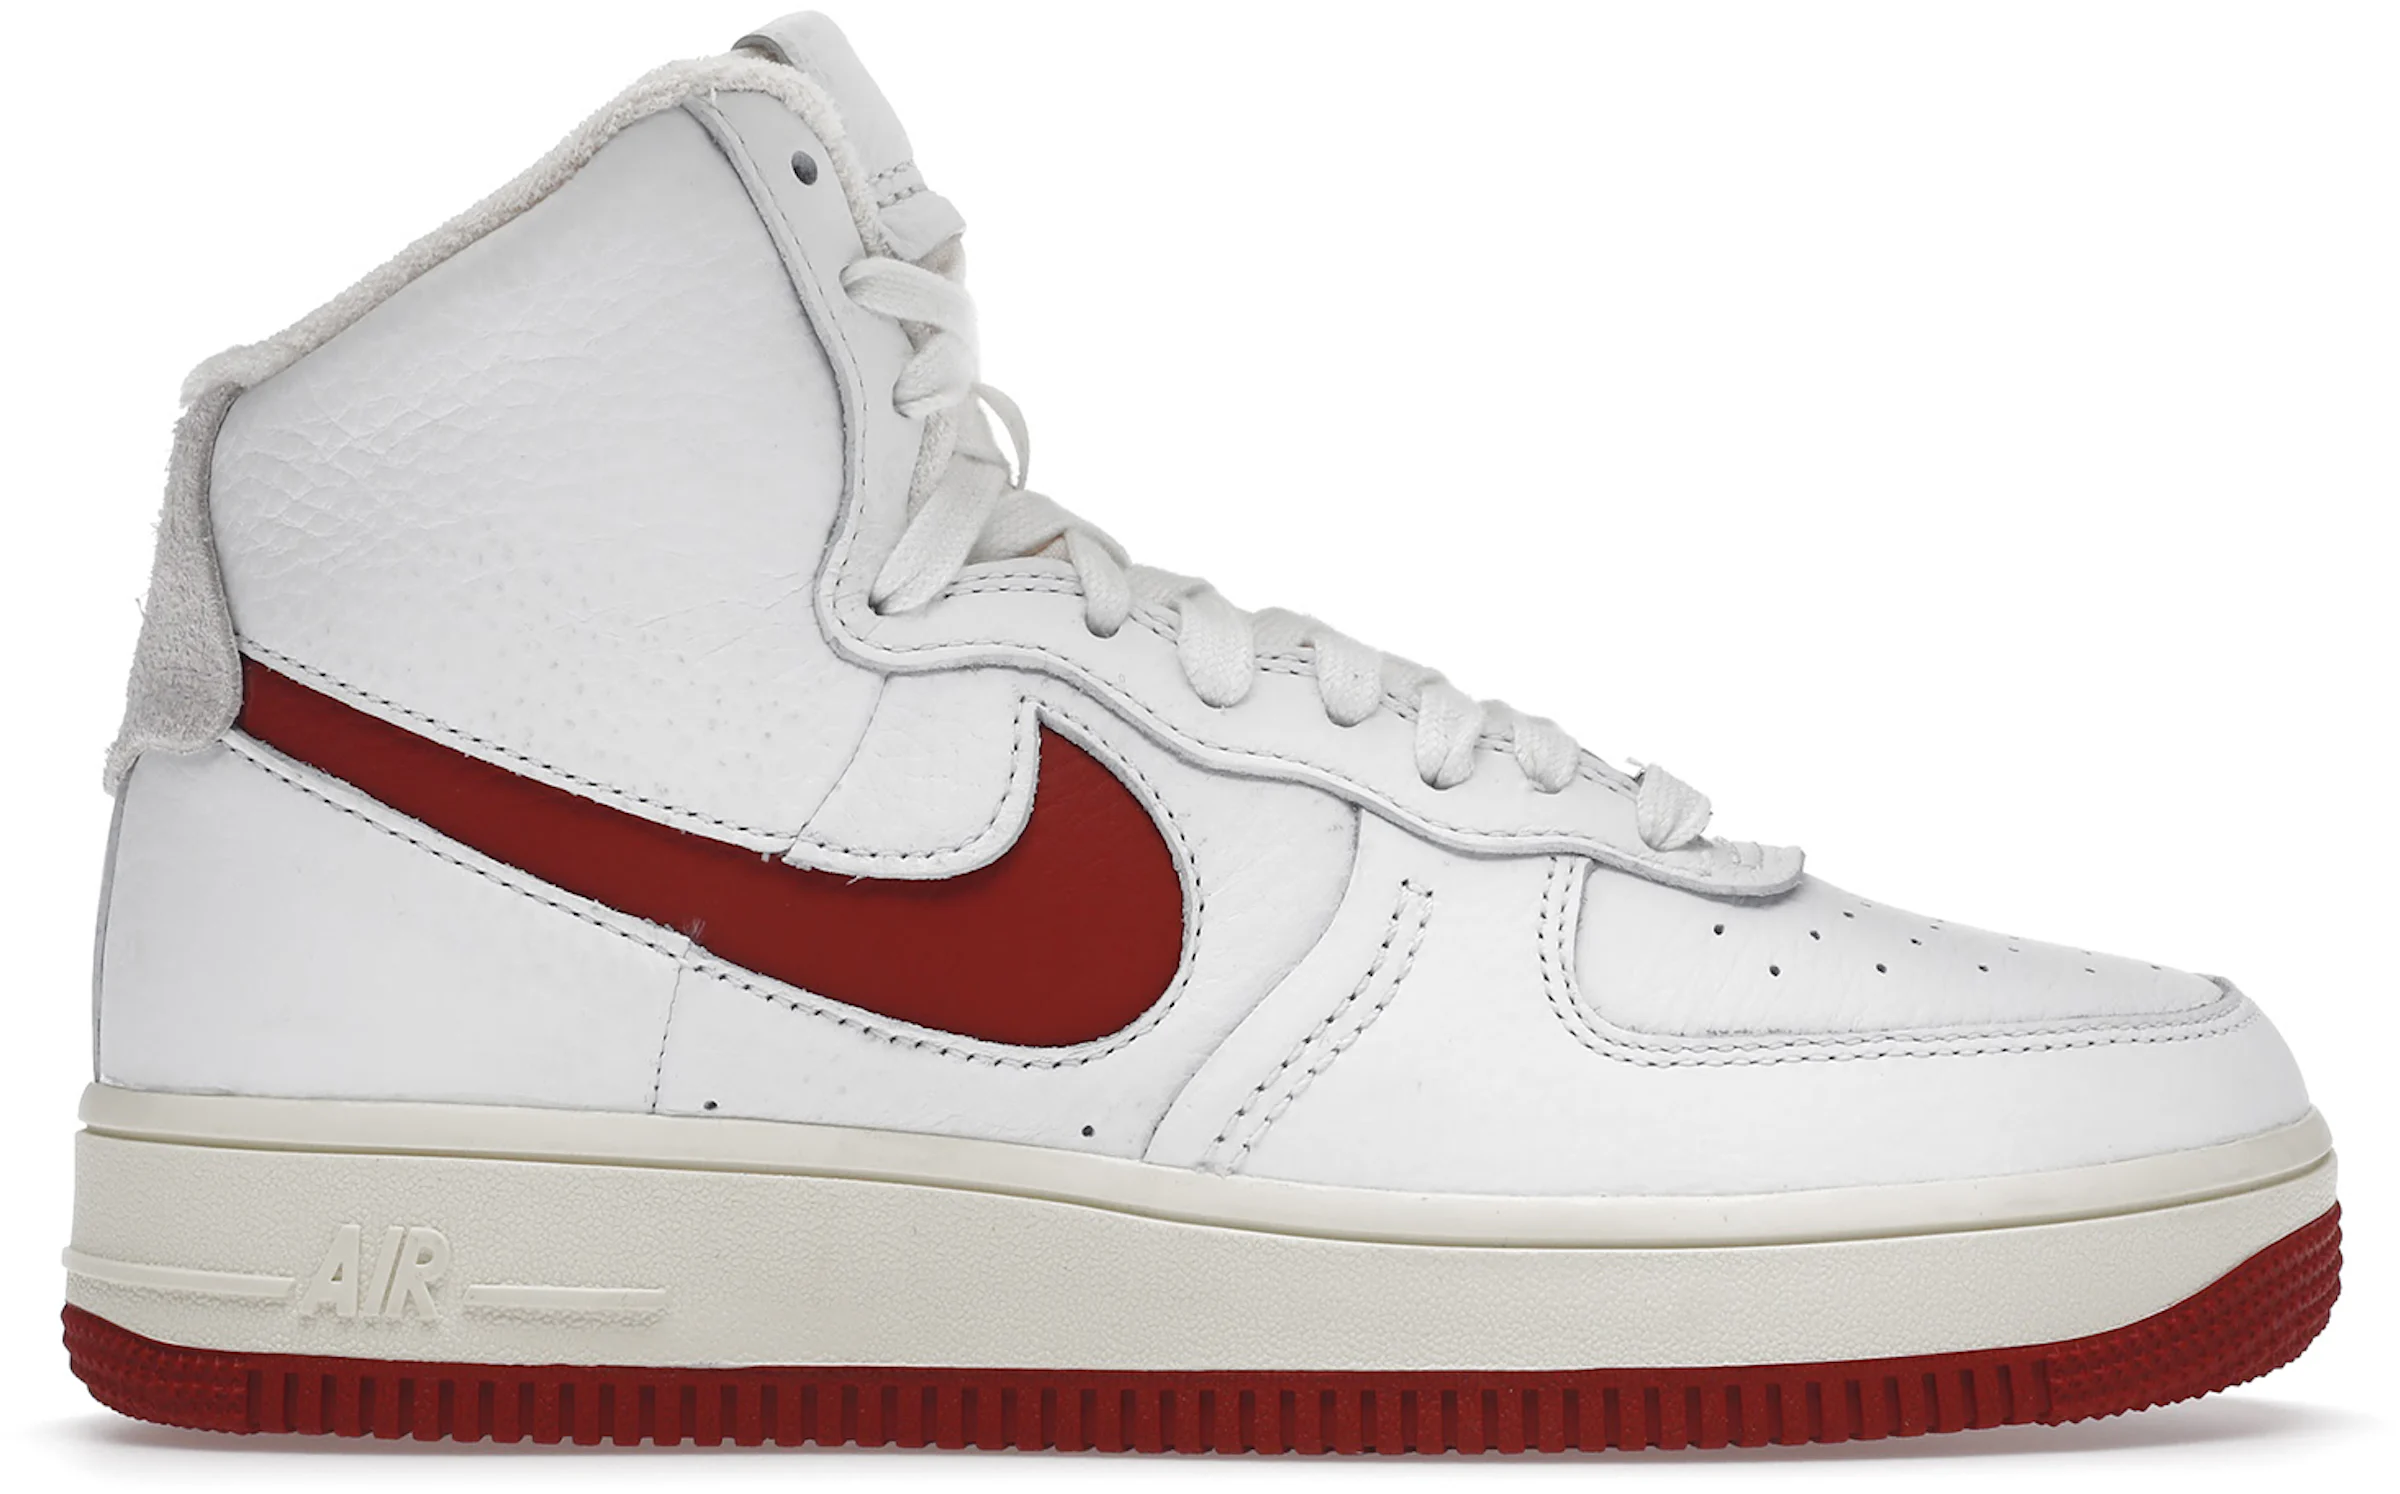 Air Force 1 High Sculpt Summit White Gym Red Sneaker Review QuickSchopes  266 Schopes DC3590 100 Hi 